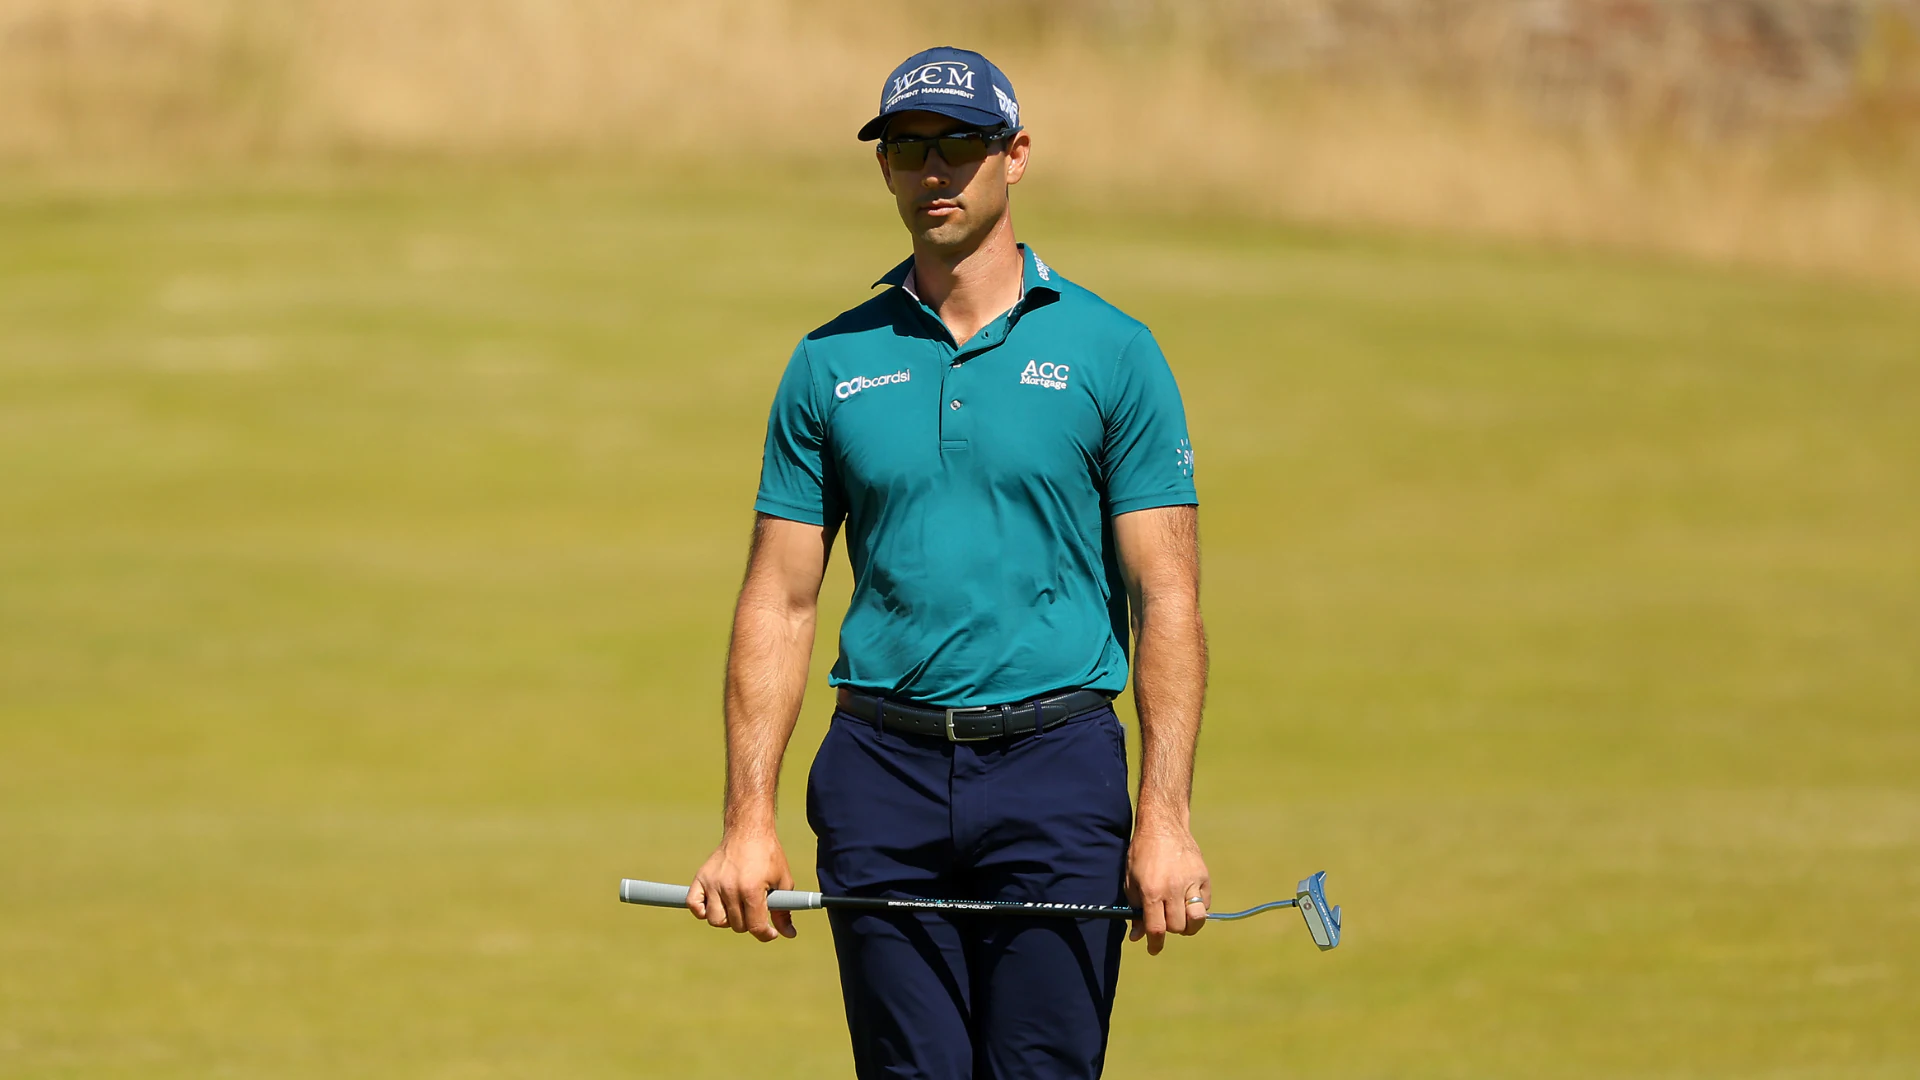 Cameron Tringale shoots course-record tying 61 at 2022 Genesis Scottish Open